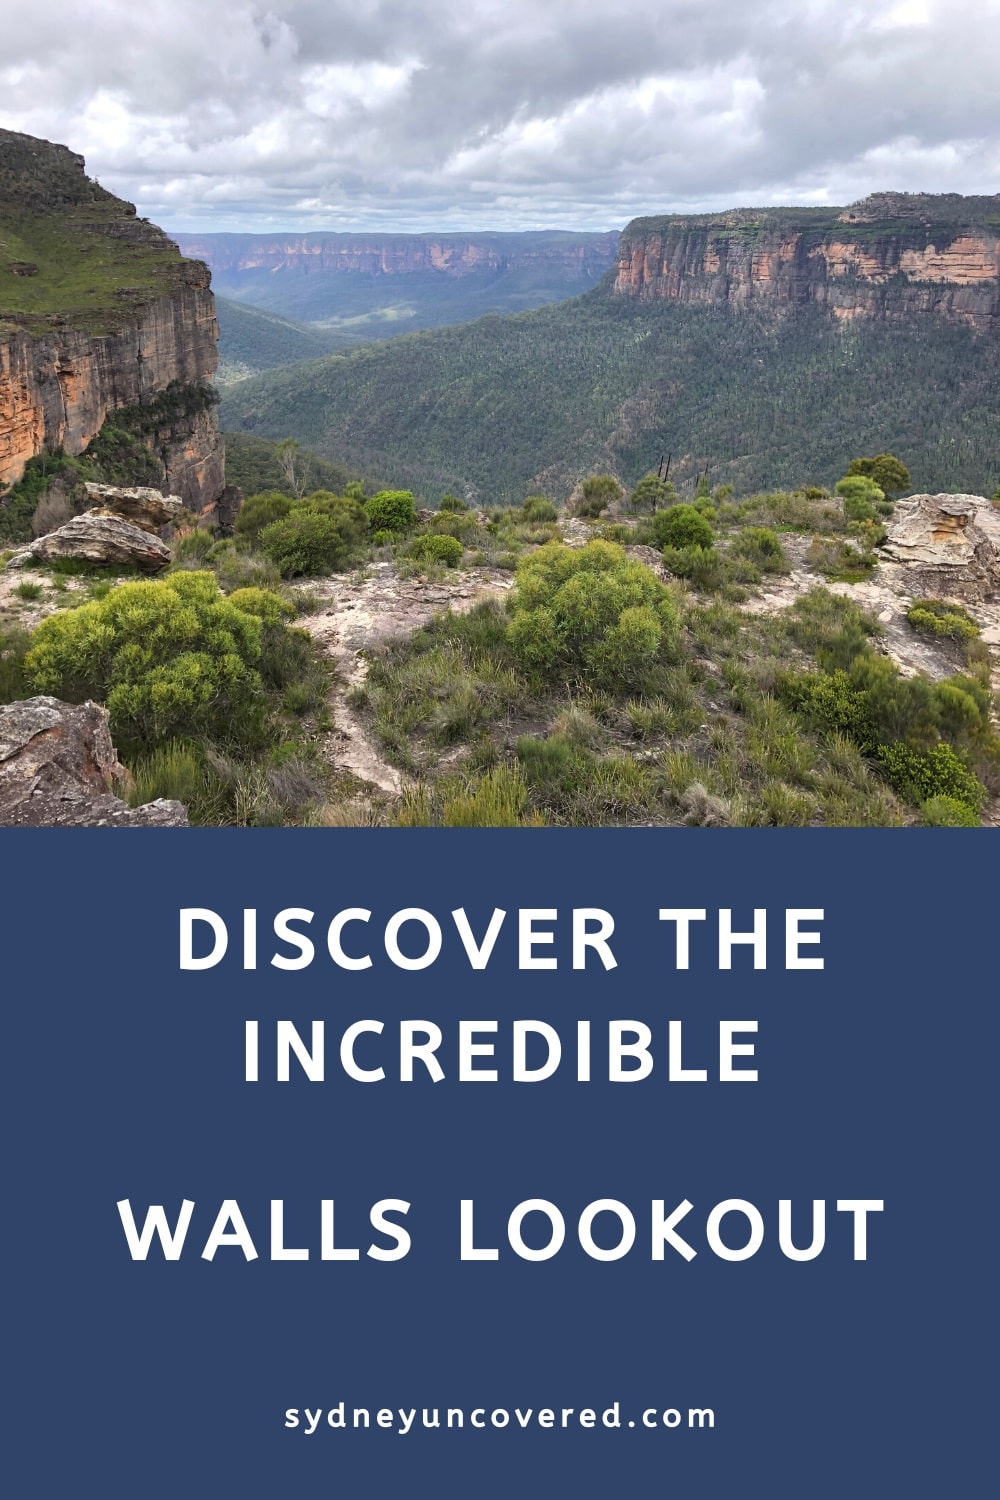 Walls Lookout in the Blue Mountains